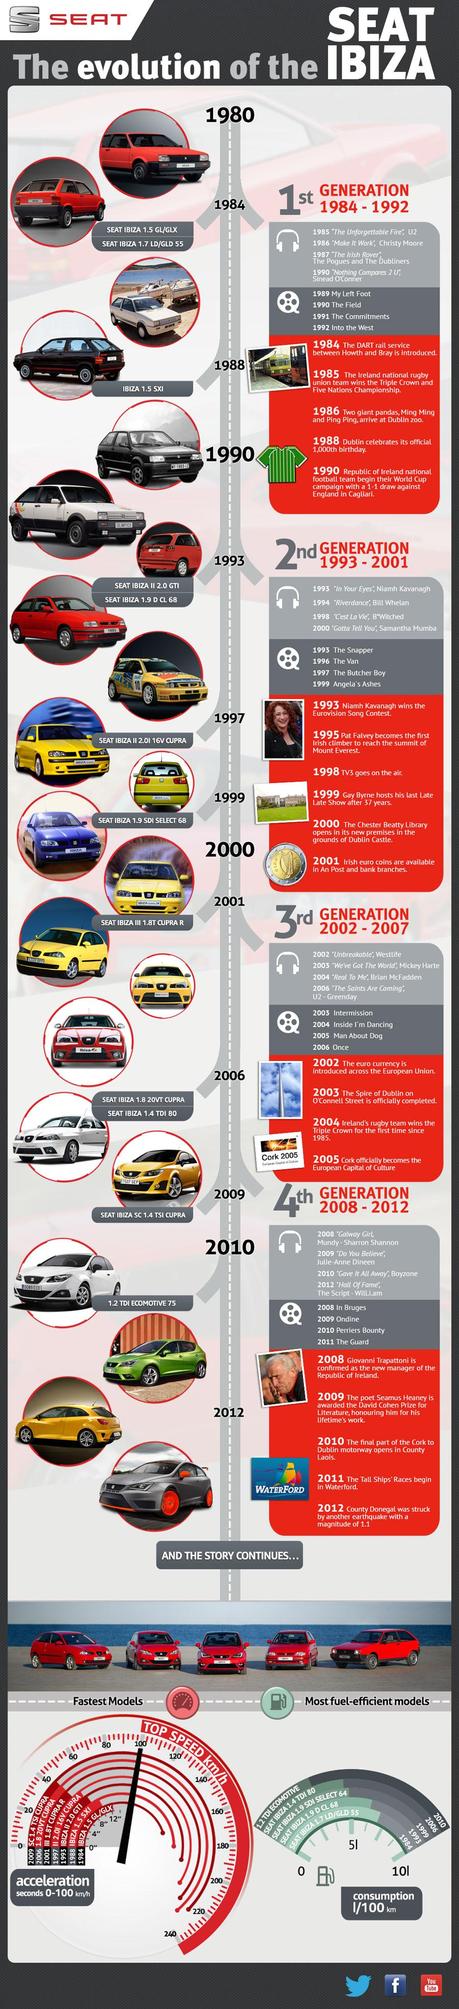 How The SEAT Ibiza Has Evolved Infographic